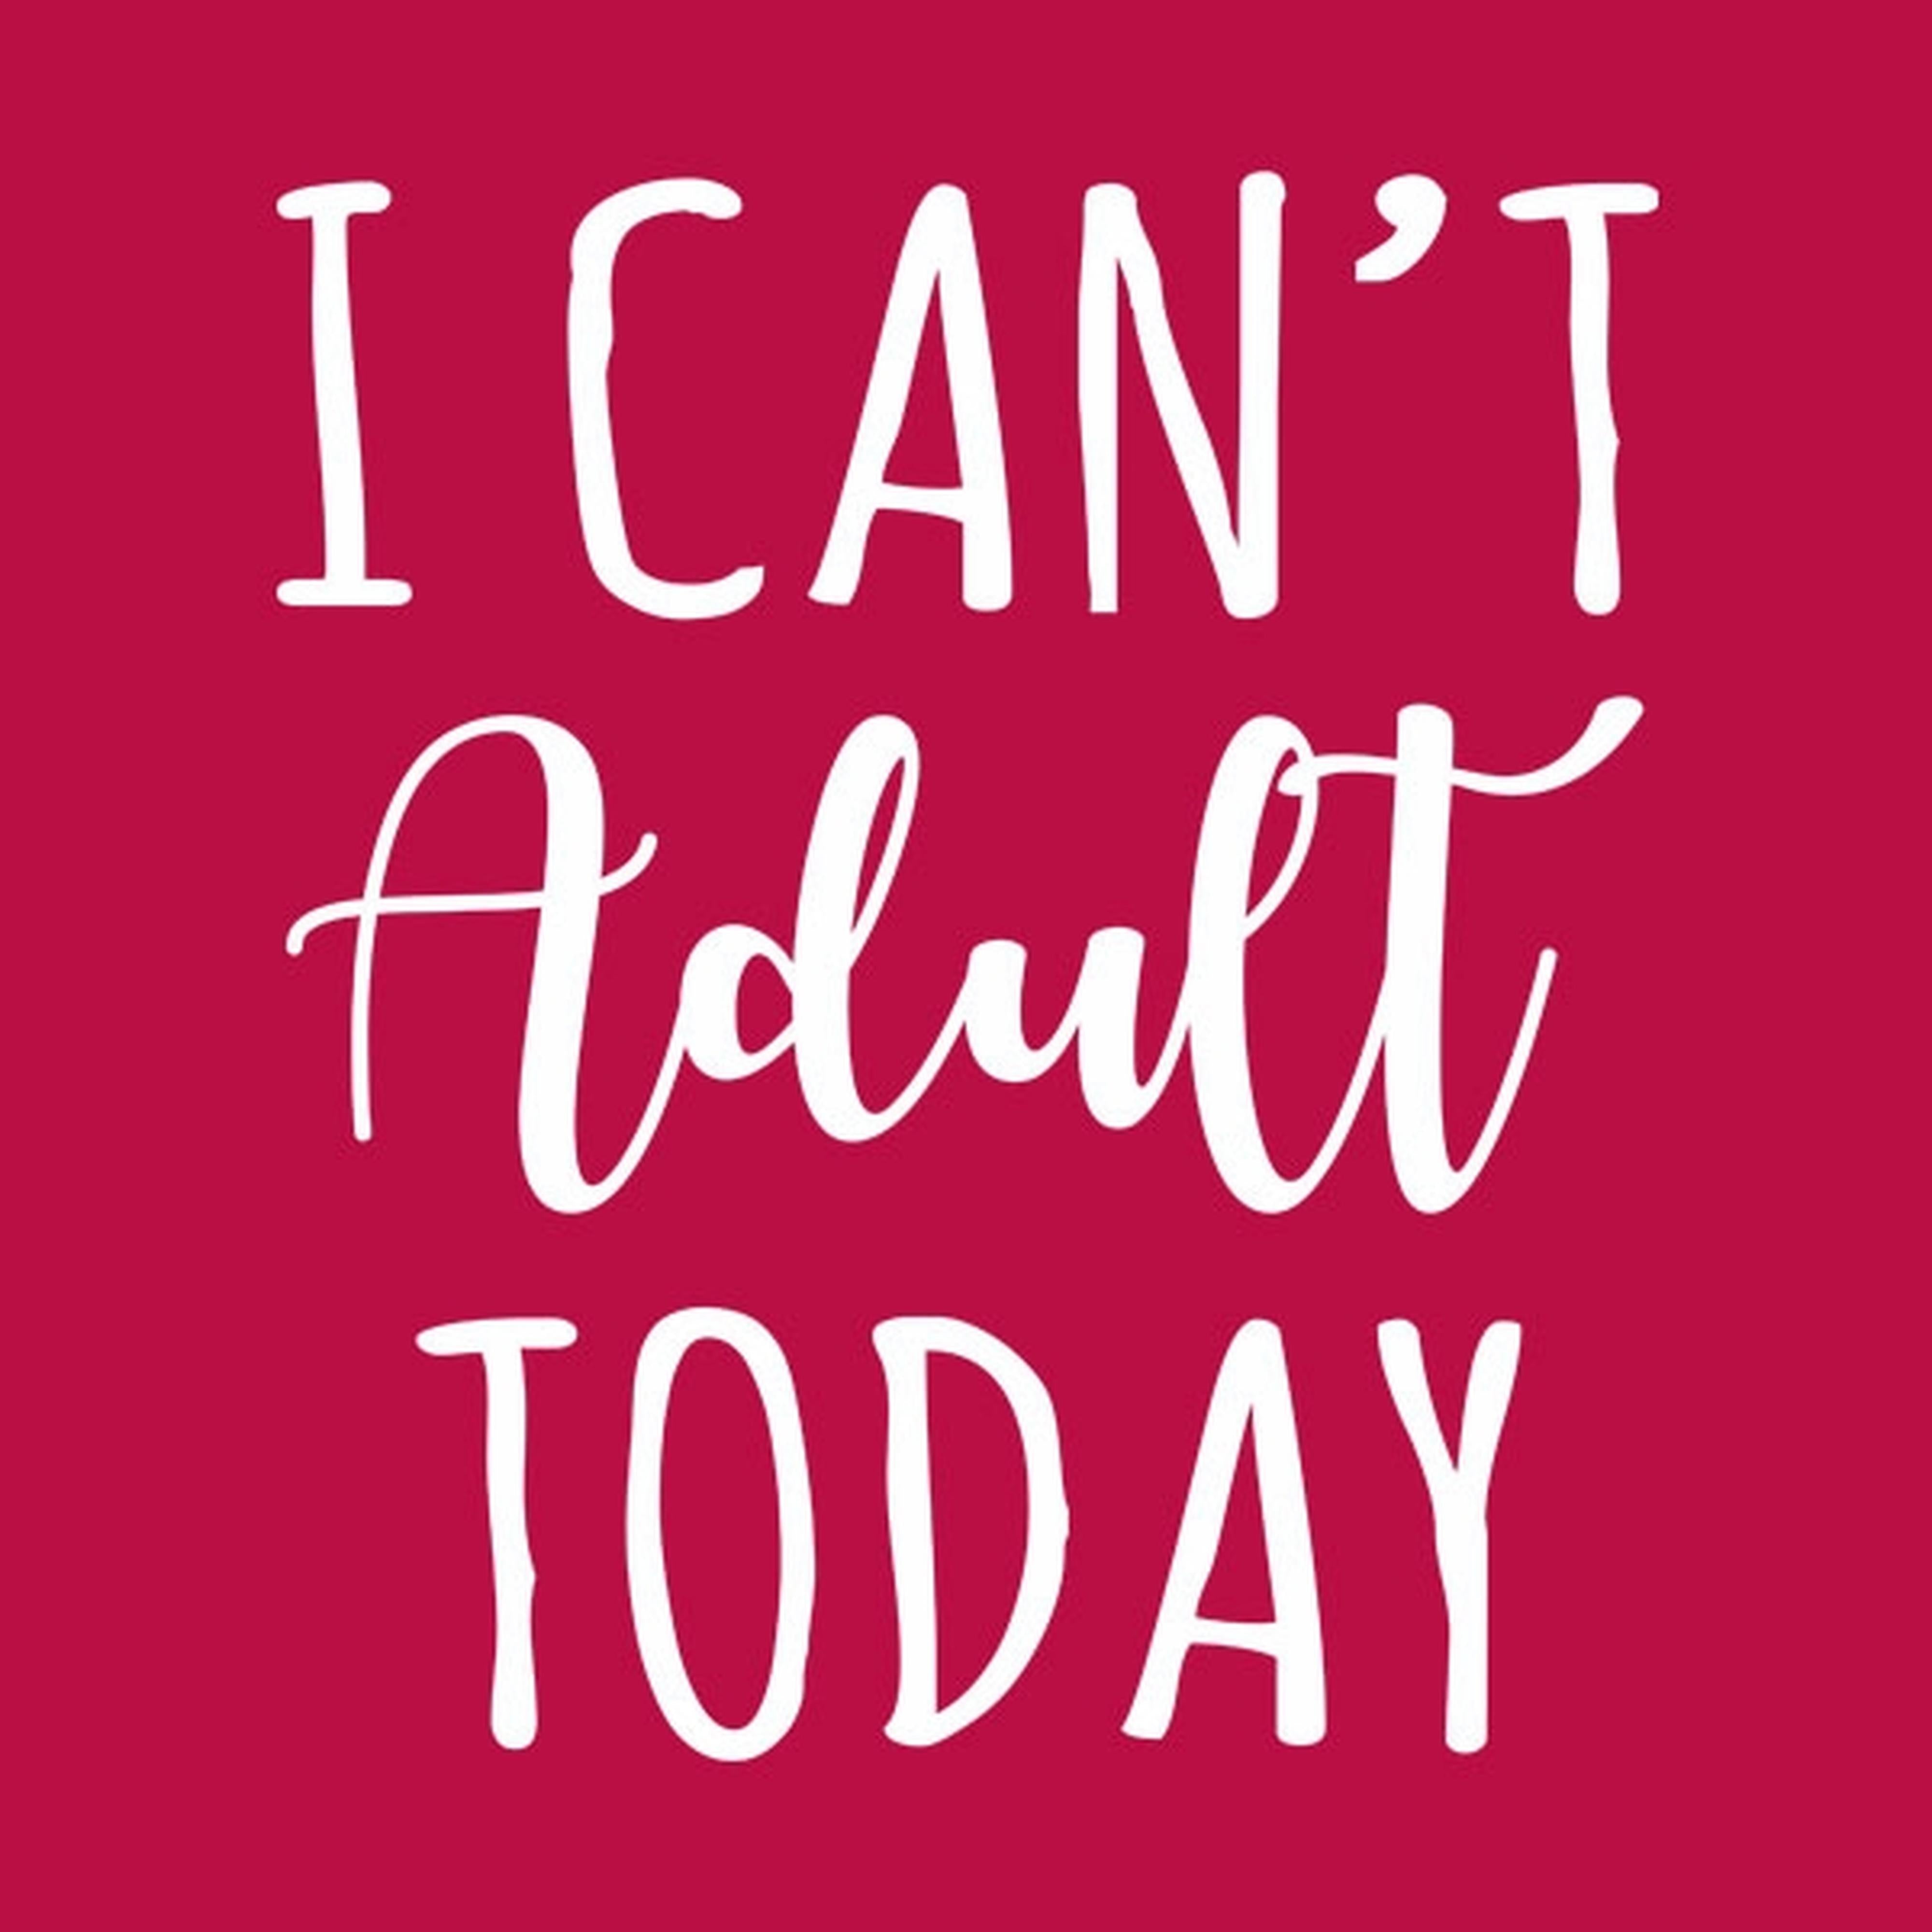 I can't adult today - T-shirt